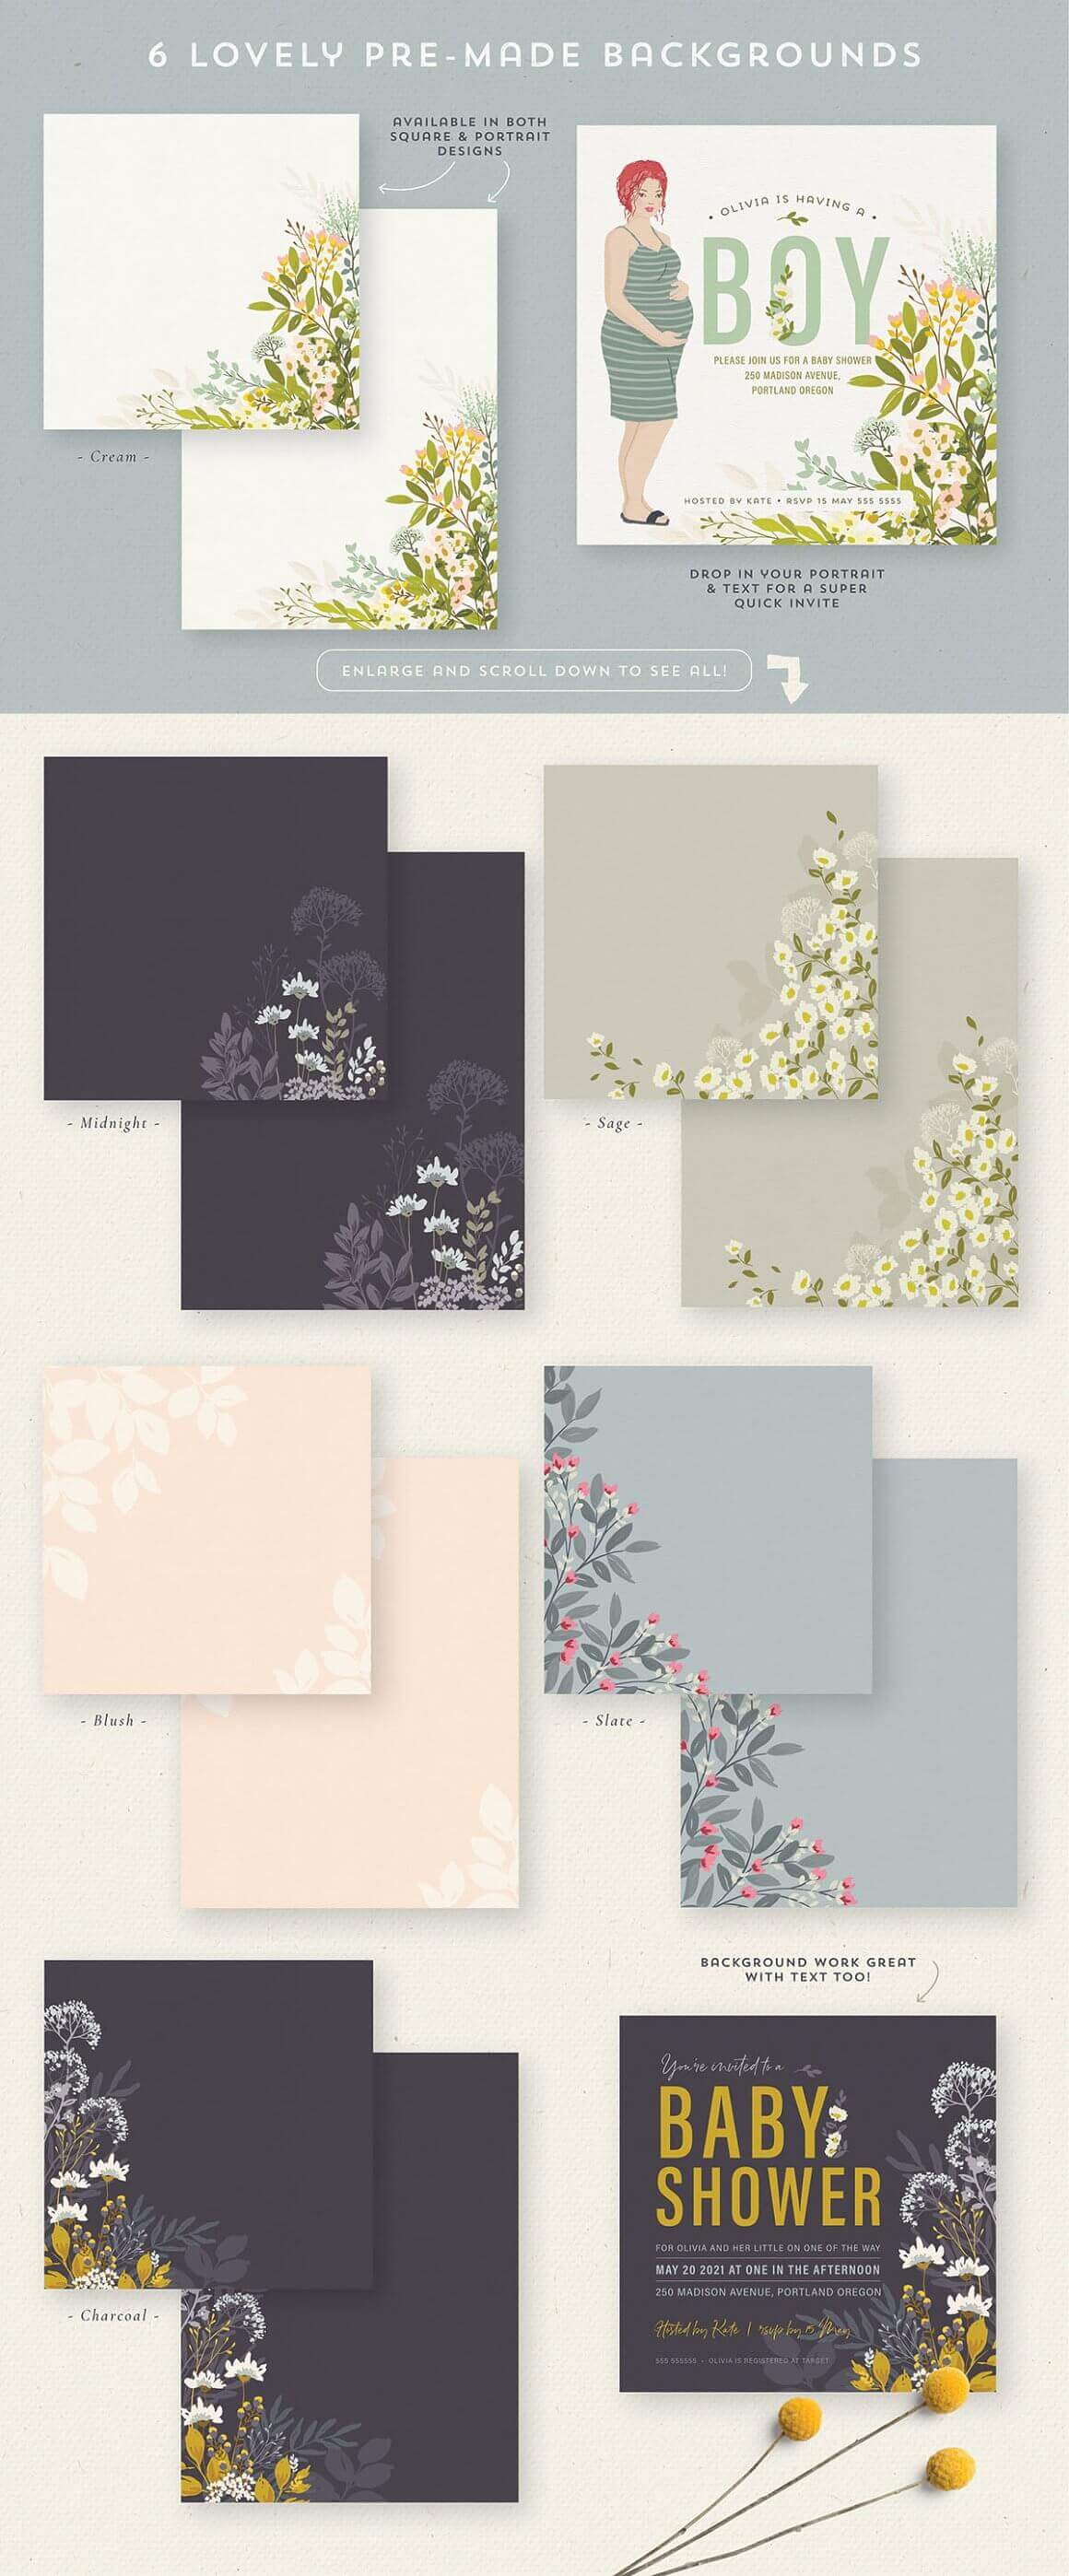 Few backgrounds: blush, slate, midnight and sage.